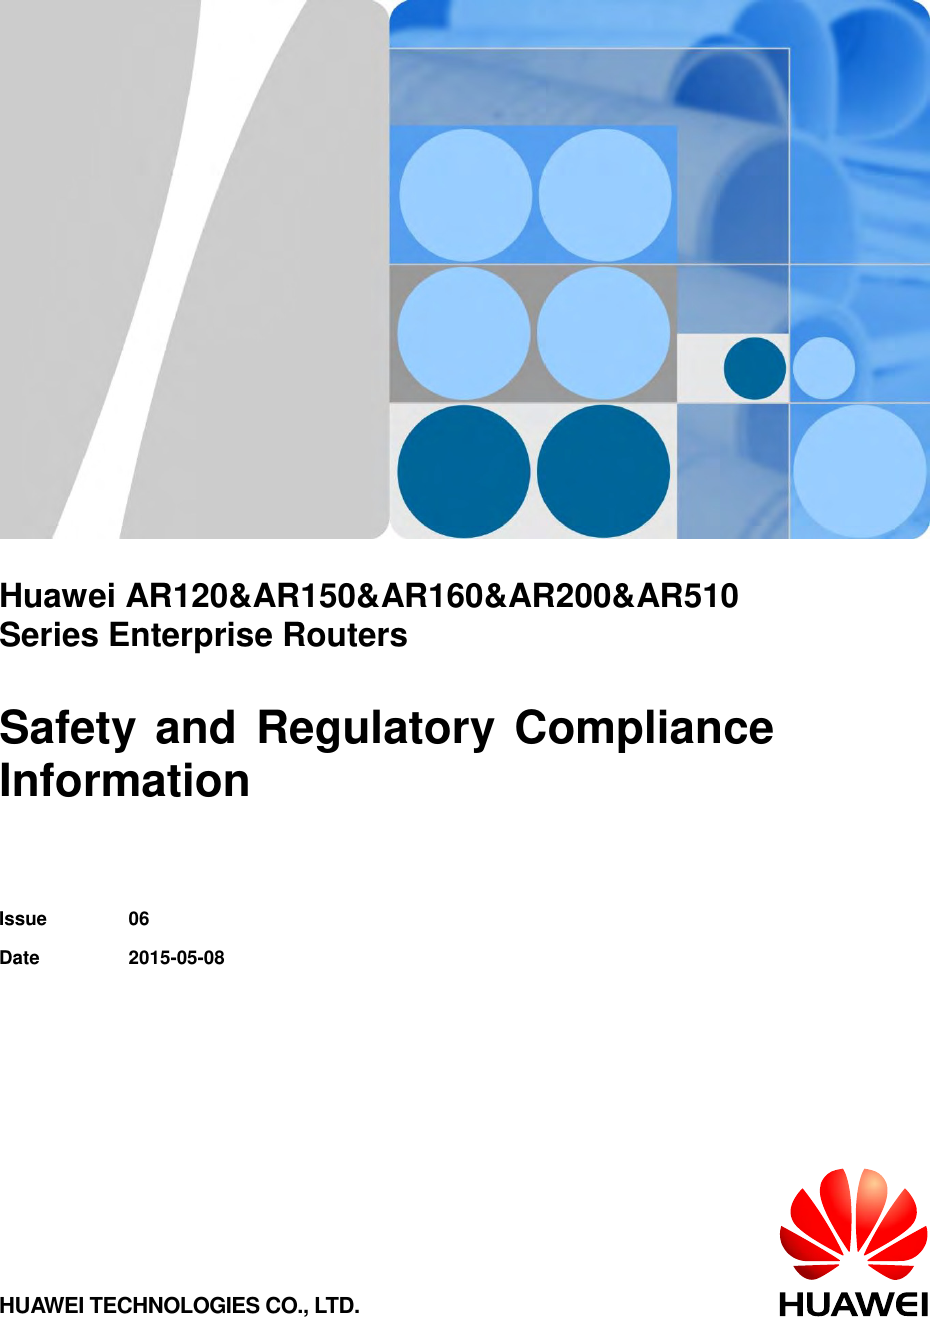         Huawei AR120&amp;AR150&amp;AR160&amp;AR200&amp;AR510 Series Enterprise Routers  Safety and Regulatory Compliance Information   Issue 06 Date 2015-05-08  HUAWEI TECHNOLOGIES CO., LTD.  